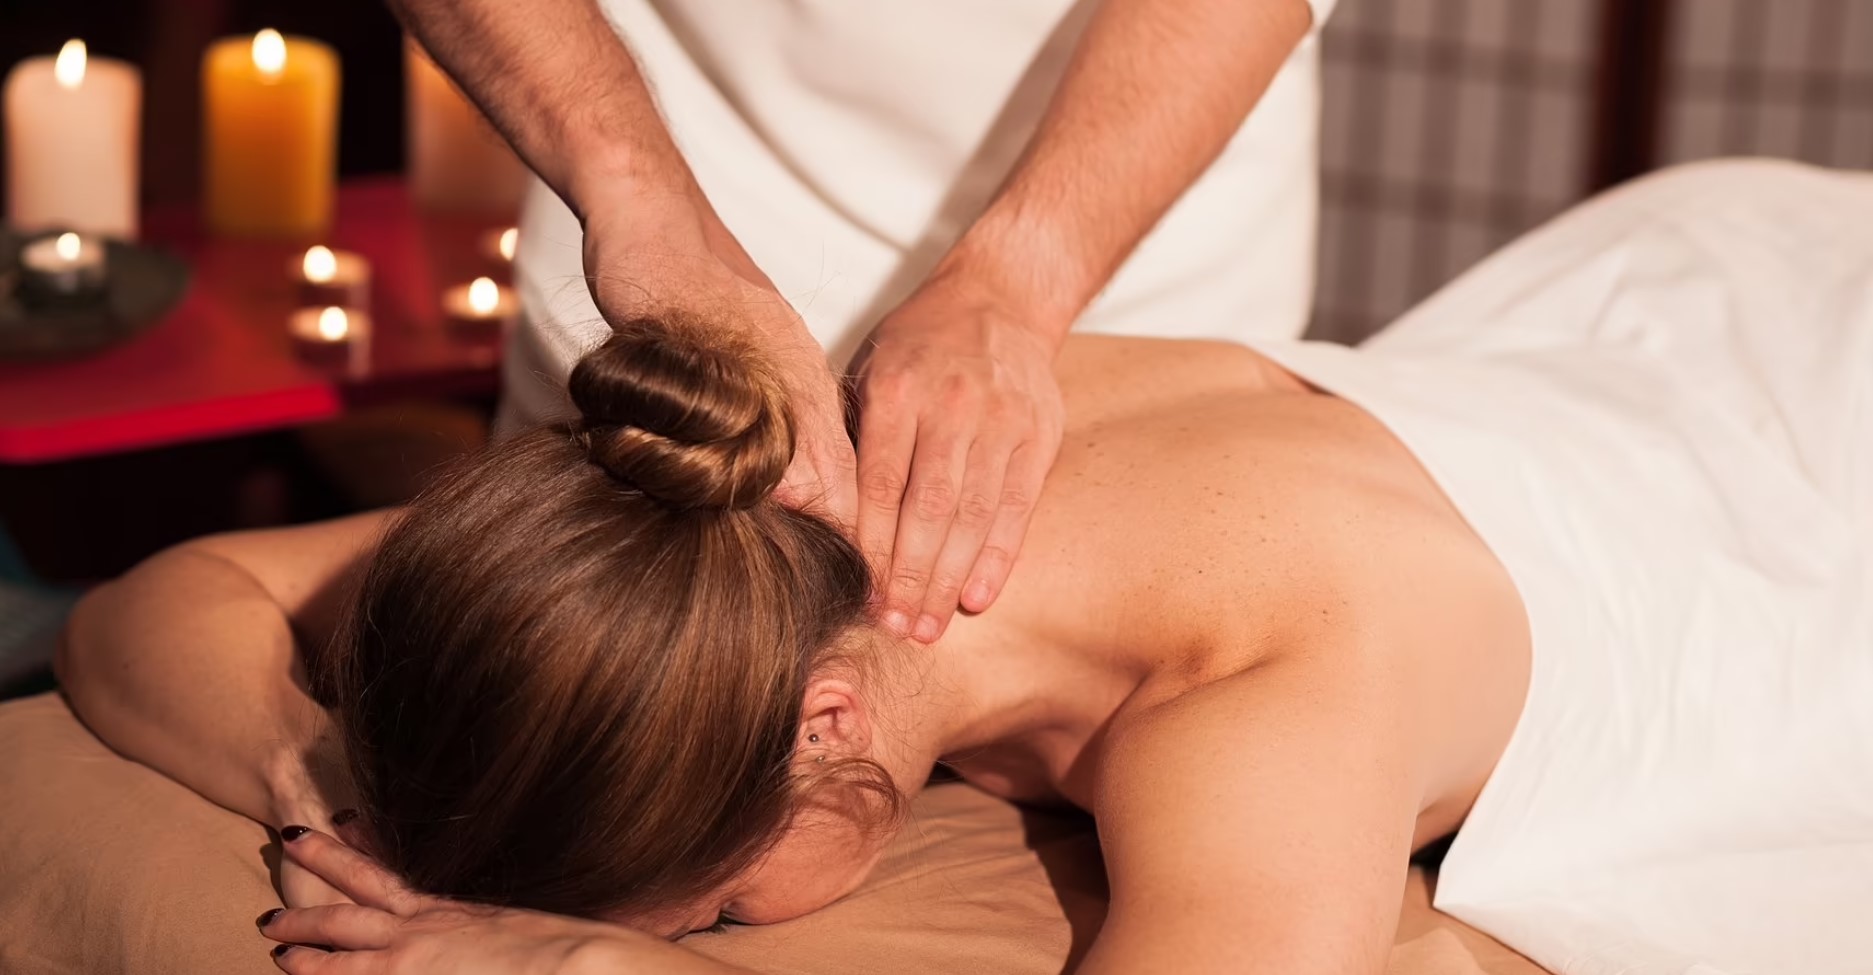 Naked Massage: Breaking Down the Taboos